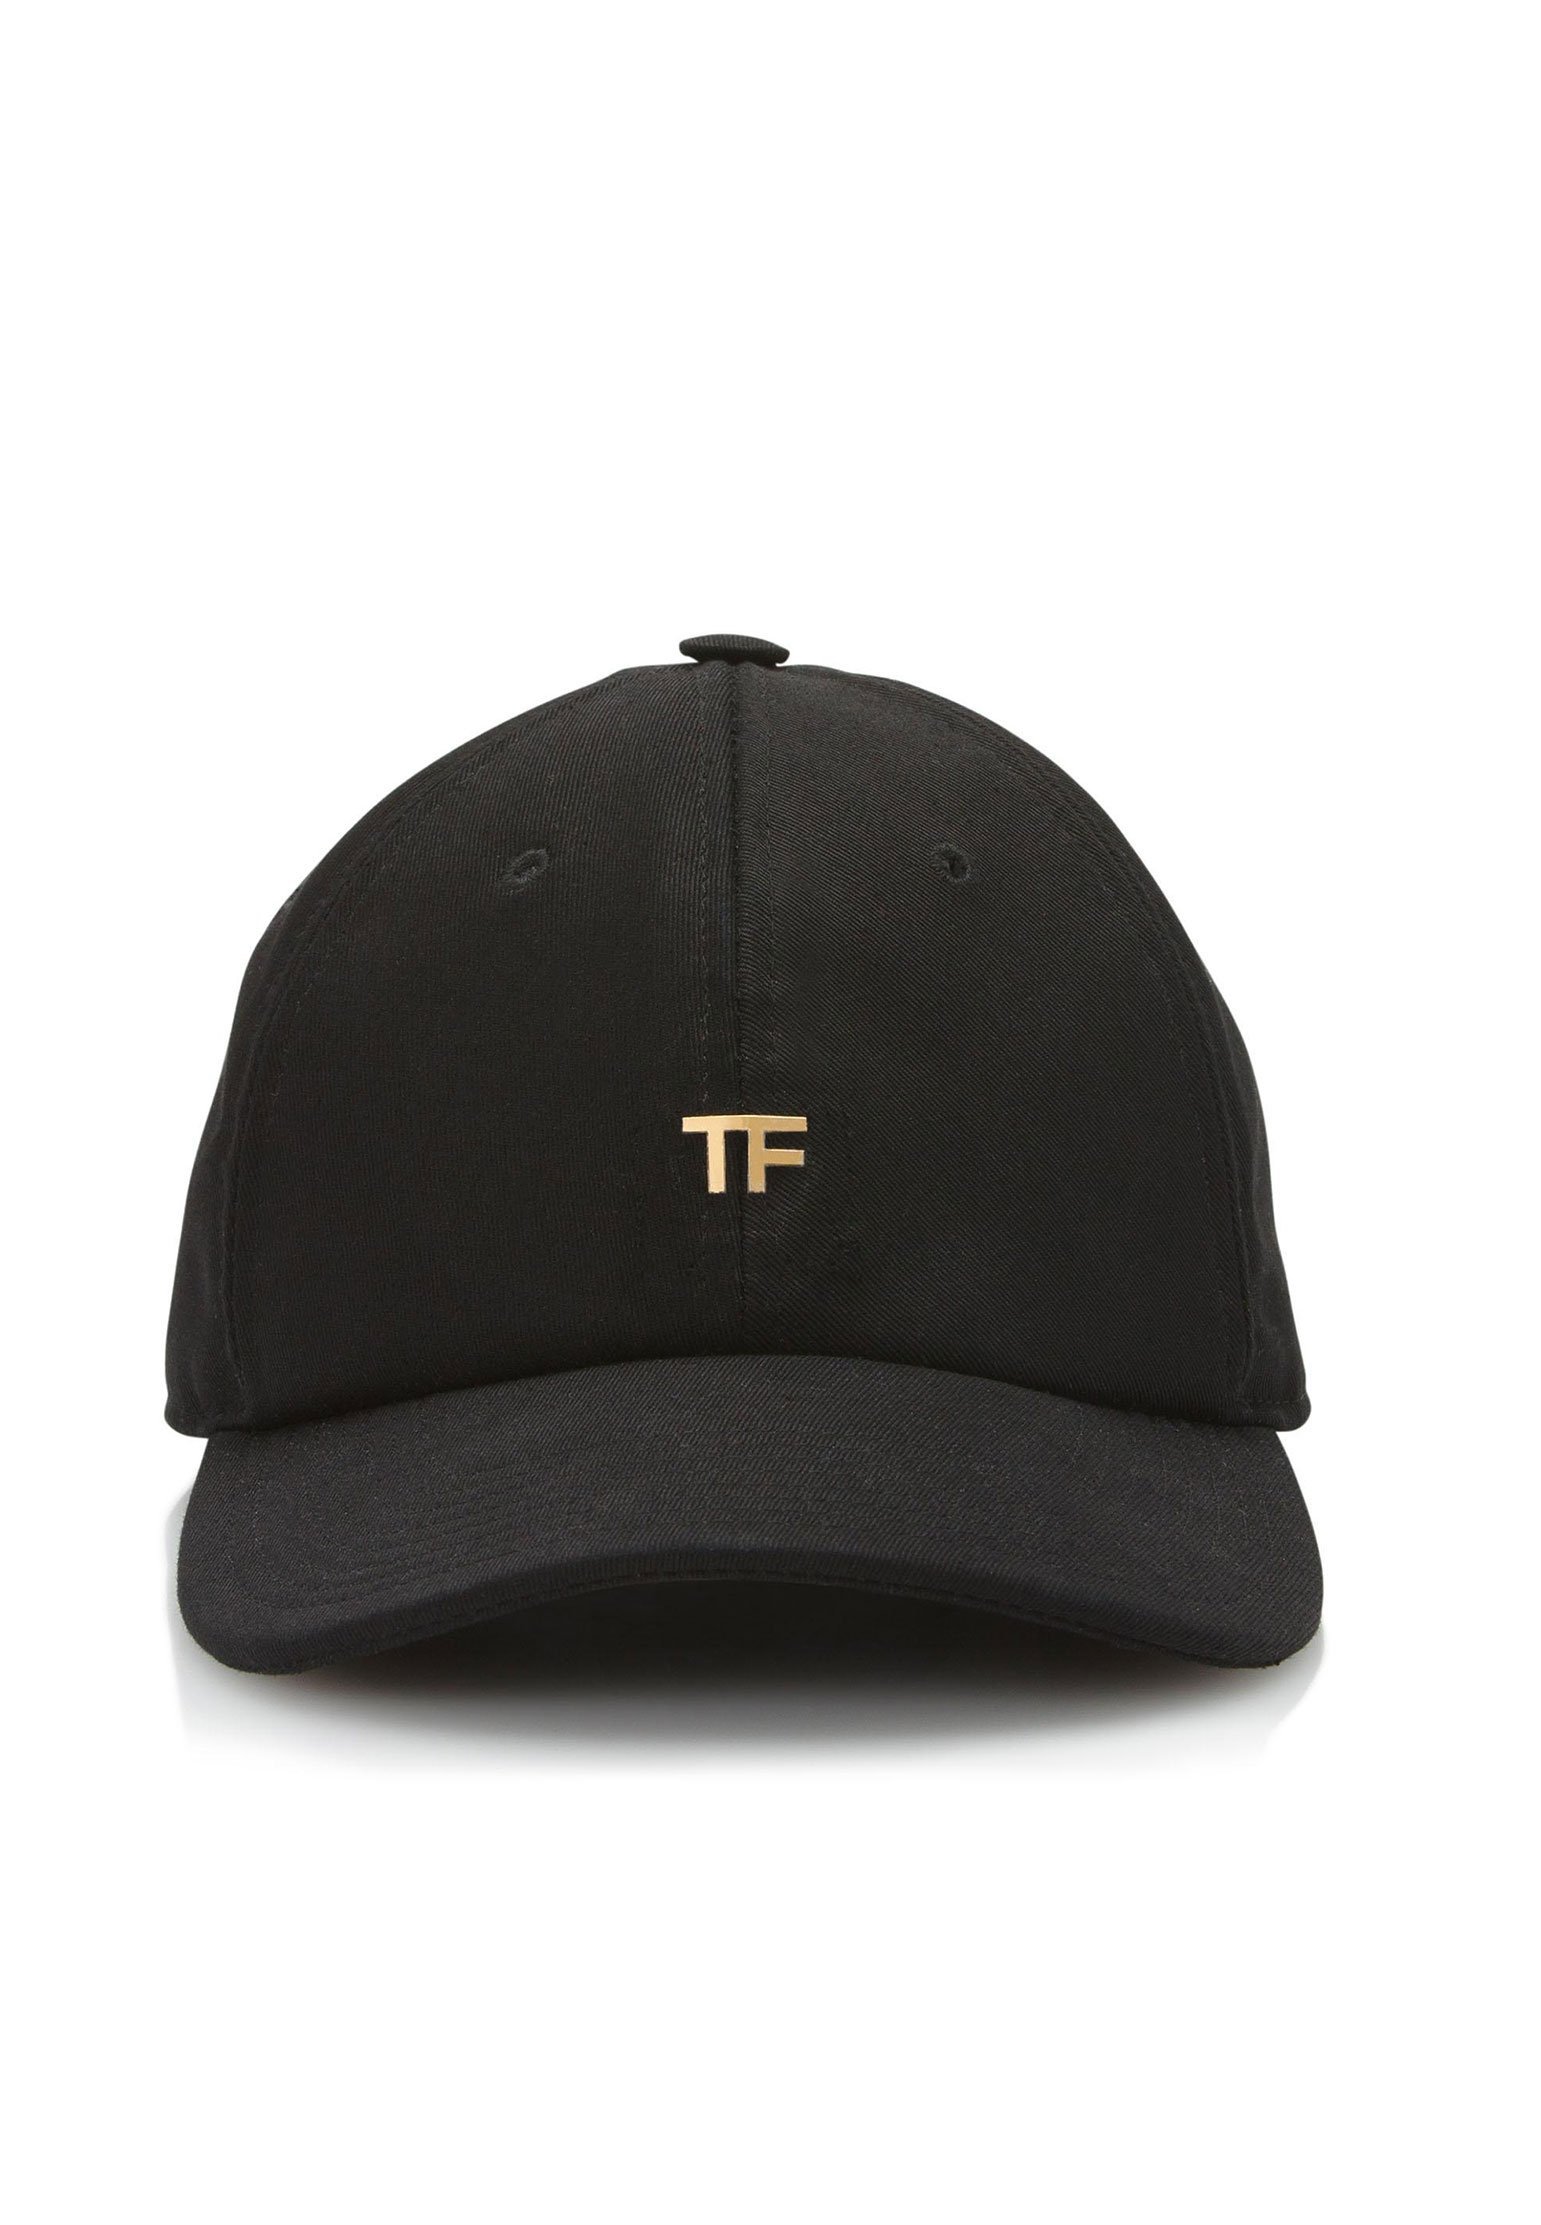 Baceball cap TOM FORD Color: black (Code: 1099) in online store Allure